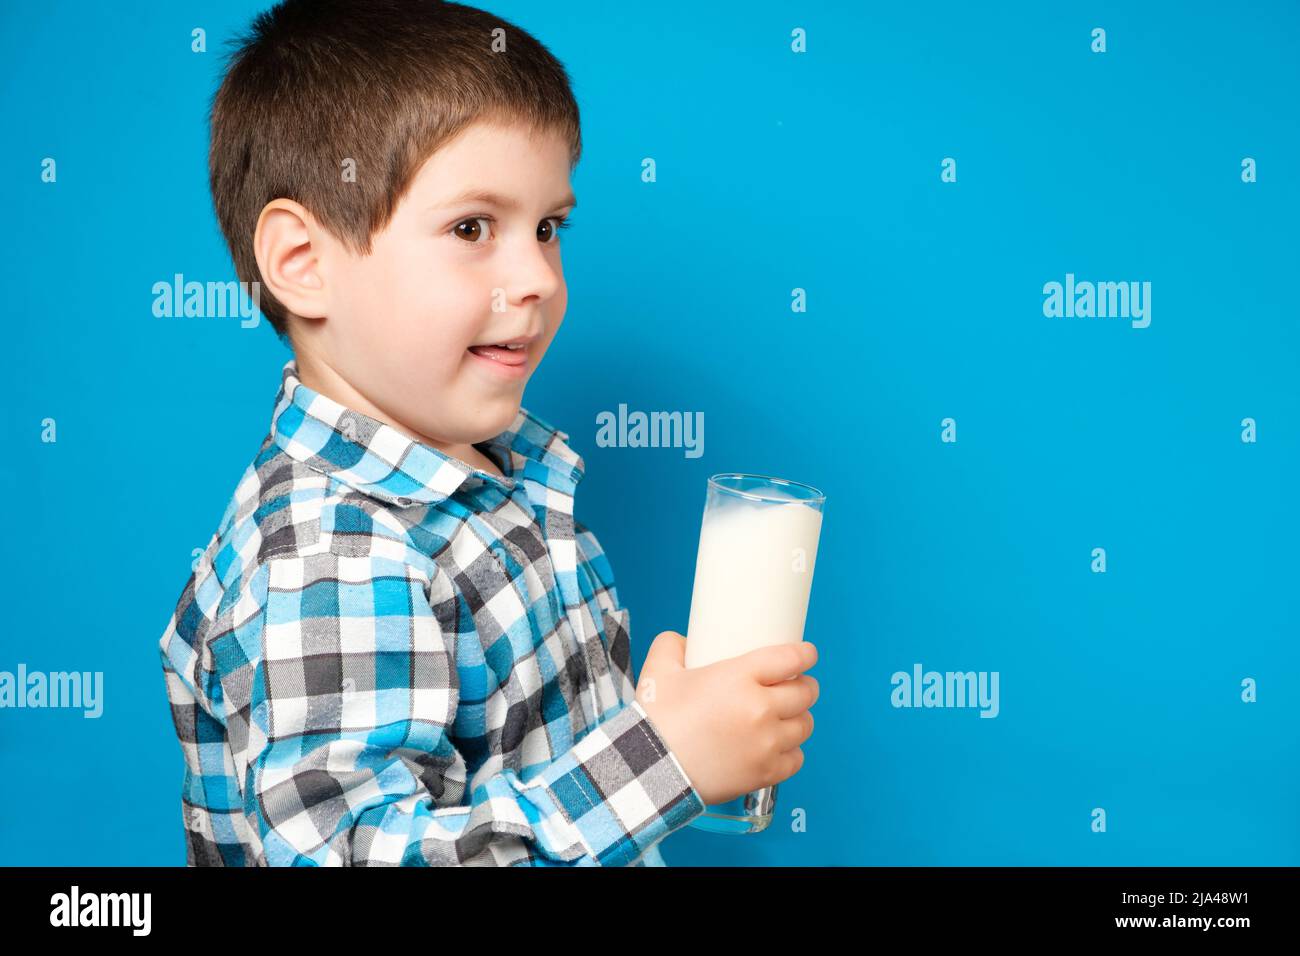 a-4-year-old-boy-smiles-and-holds-a-glass-of-milk-on-a-blue-background